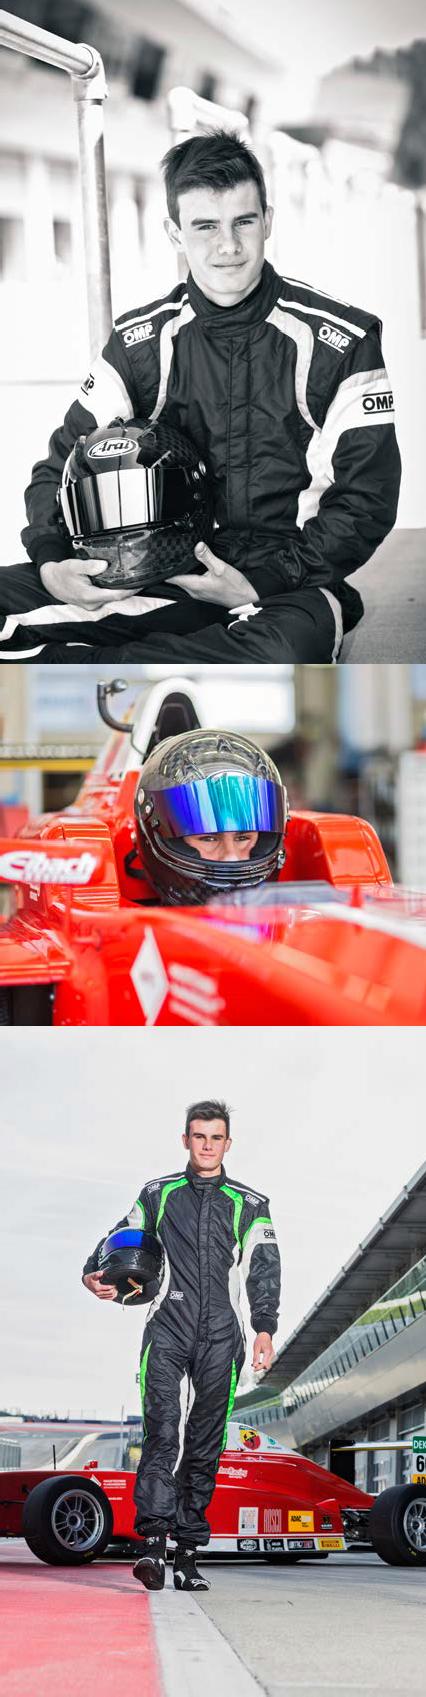 Racing Profile Who I am Yannik Brandt, 15 years old Citizenship of Switzerland and Germany Born in Brussels / Belgium Student, International School in Zurich, grade 10 Bilingual, German and English